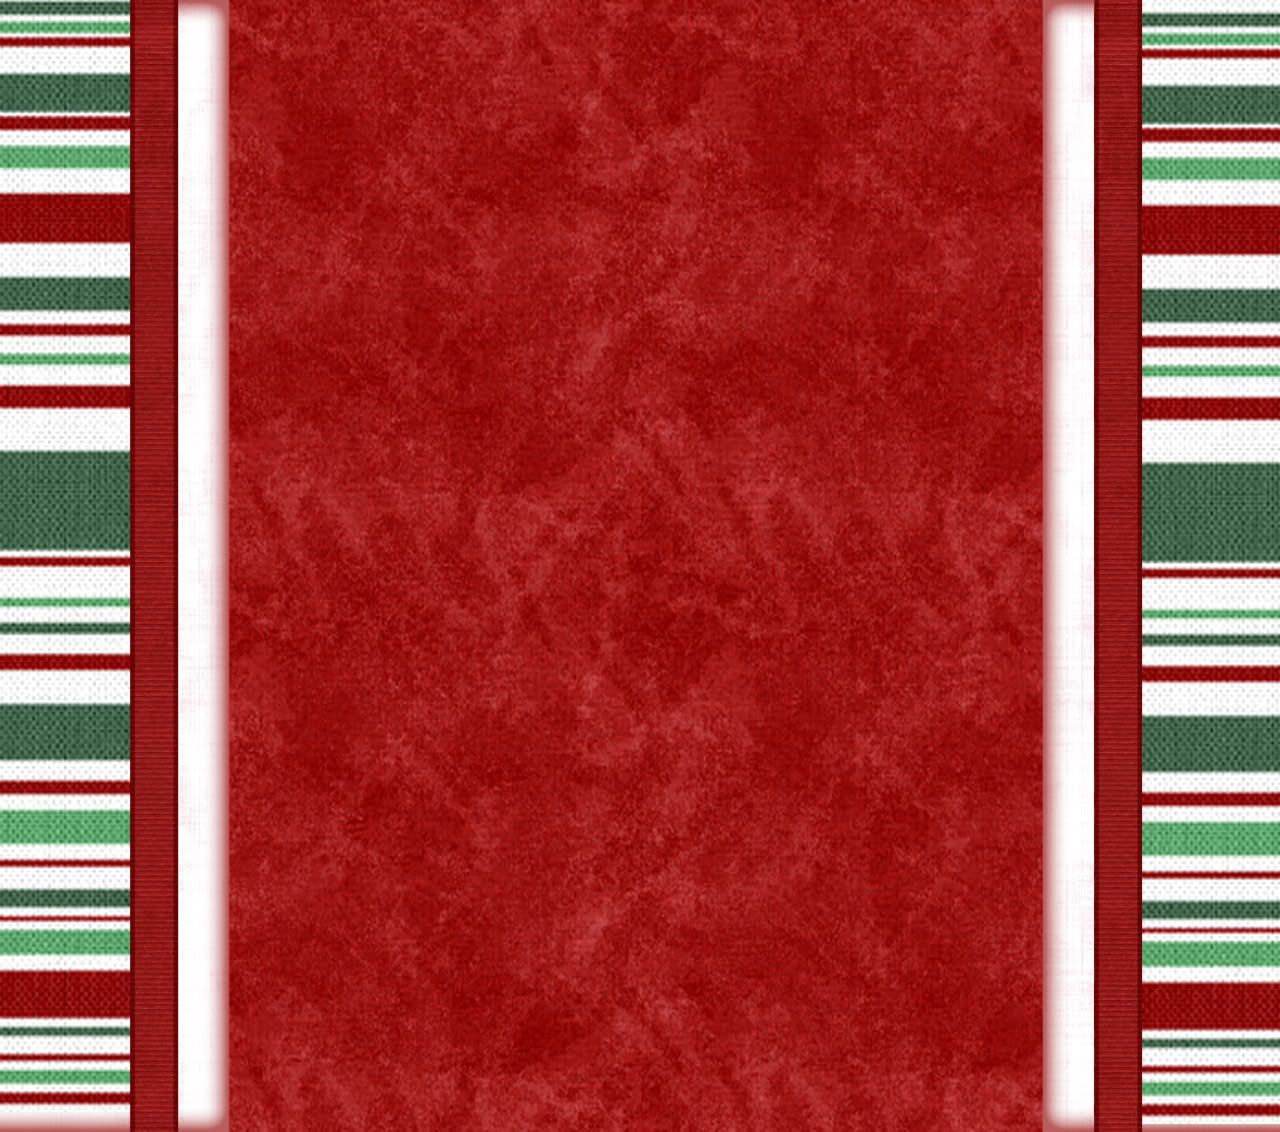 Free download 1280x1132px Red and Green Wallpaper [1280x1132] for your Desktop, Mobile & Tablet. Explore Christmas Red And Green Wallpaper. Christmas Red And Green Wallpaper, Red and Green Wallpaper